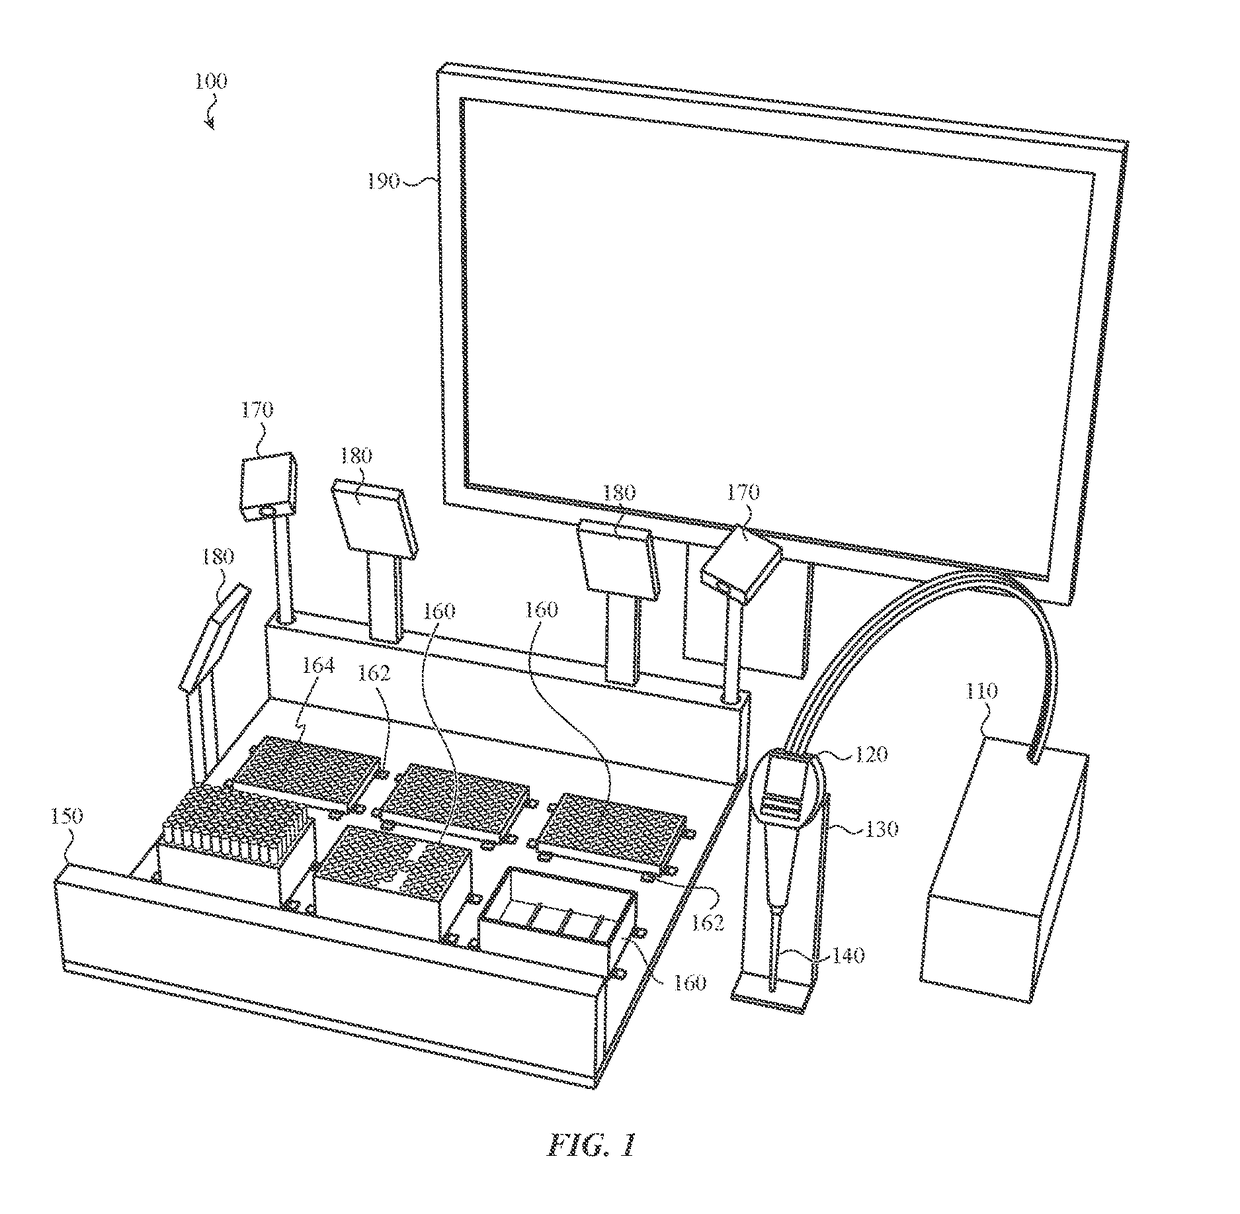 Verification pipette and vision apparatus